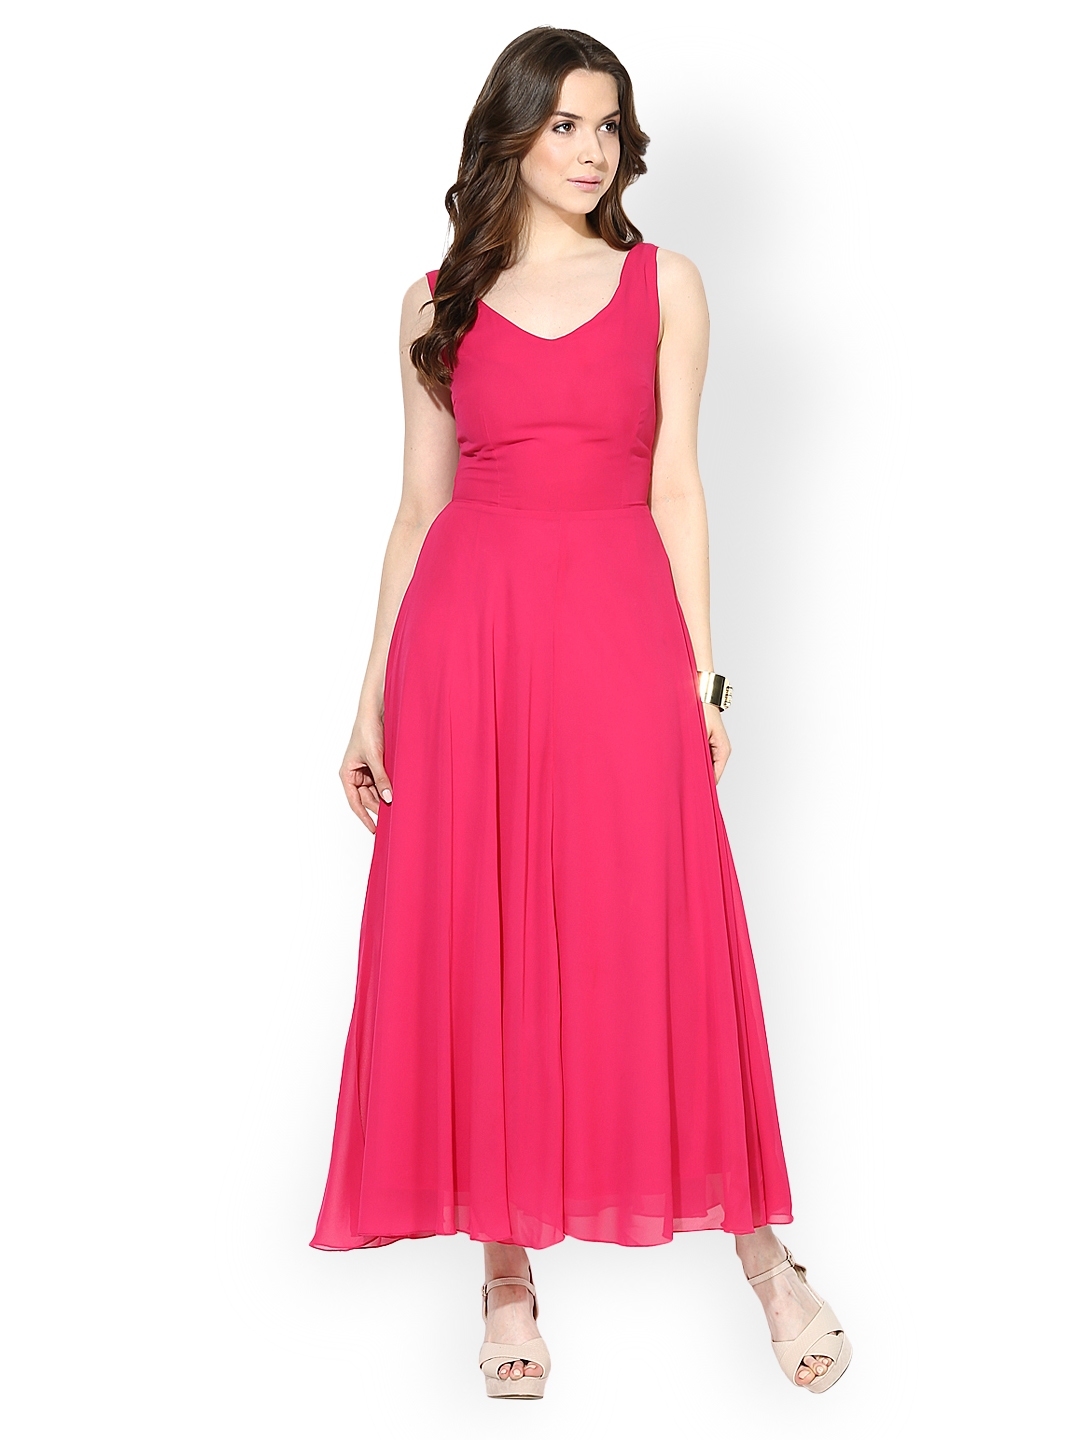 Buy Harpa Pink Maxi Dress - Dresses for 